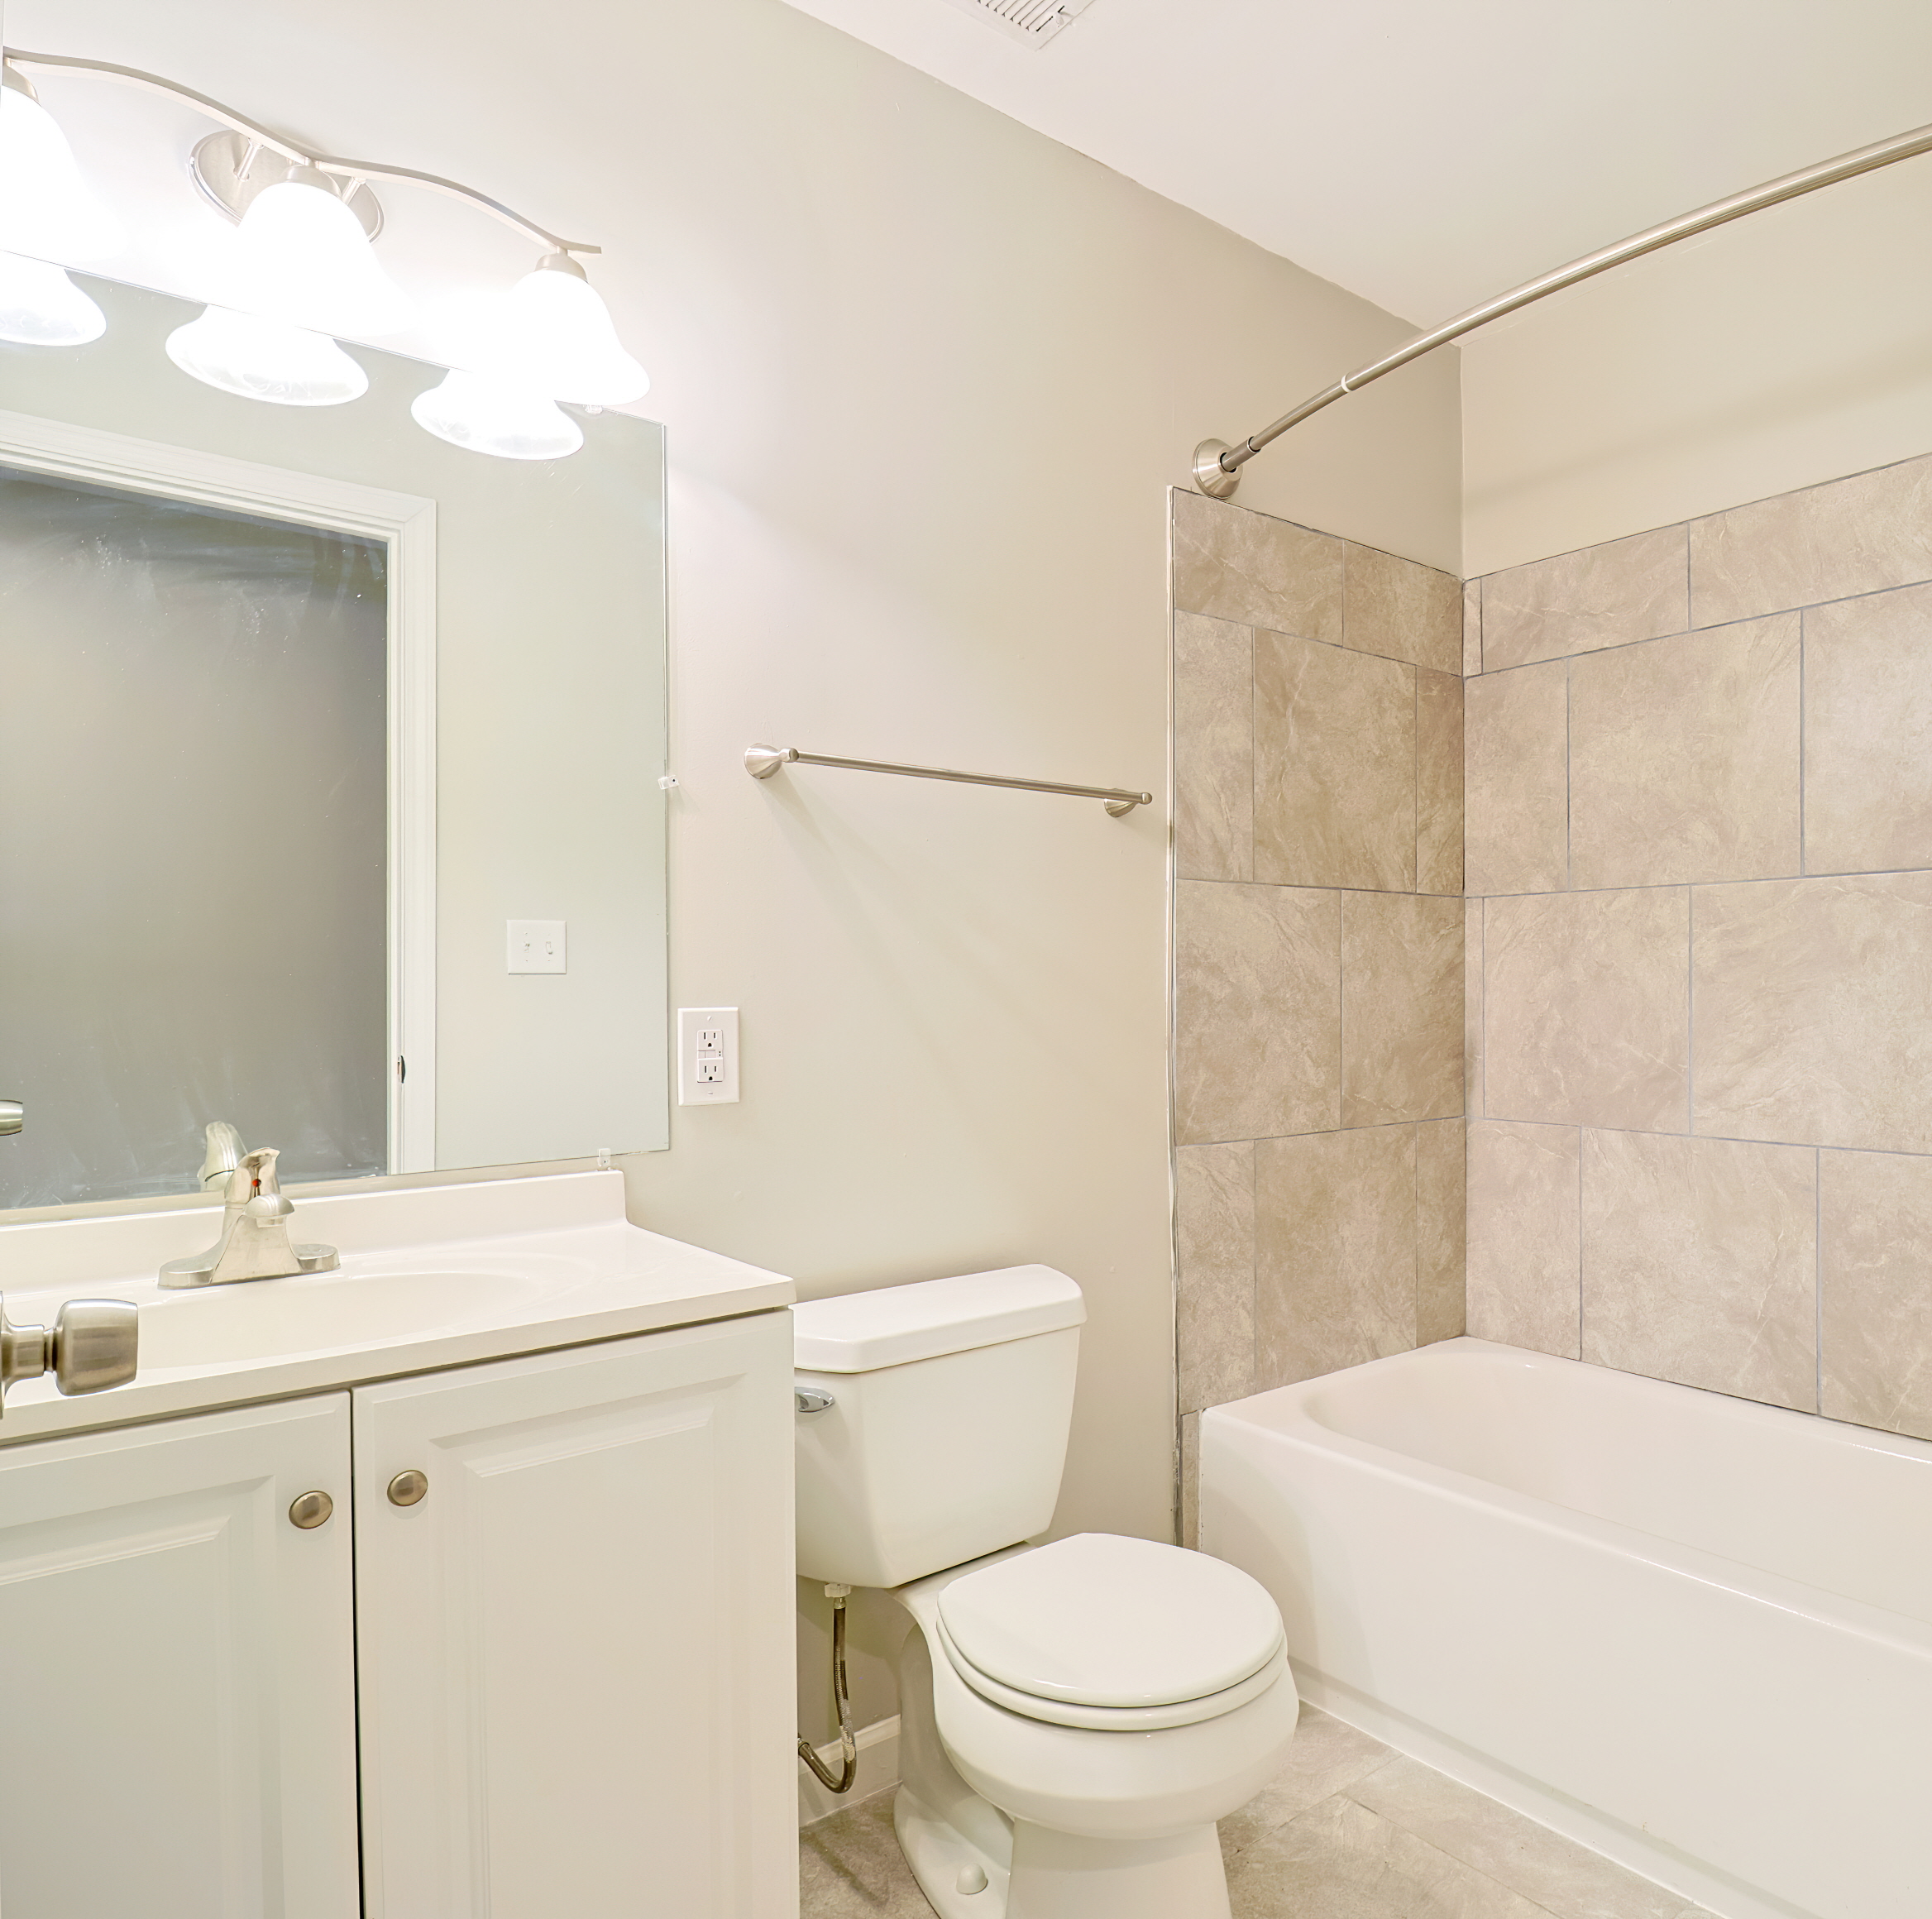 Neutral colors like beige, taupe, and ivory create a calm and timeless atmosphere in small bathrooms.